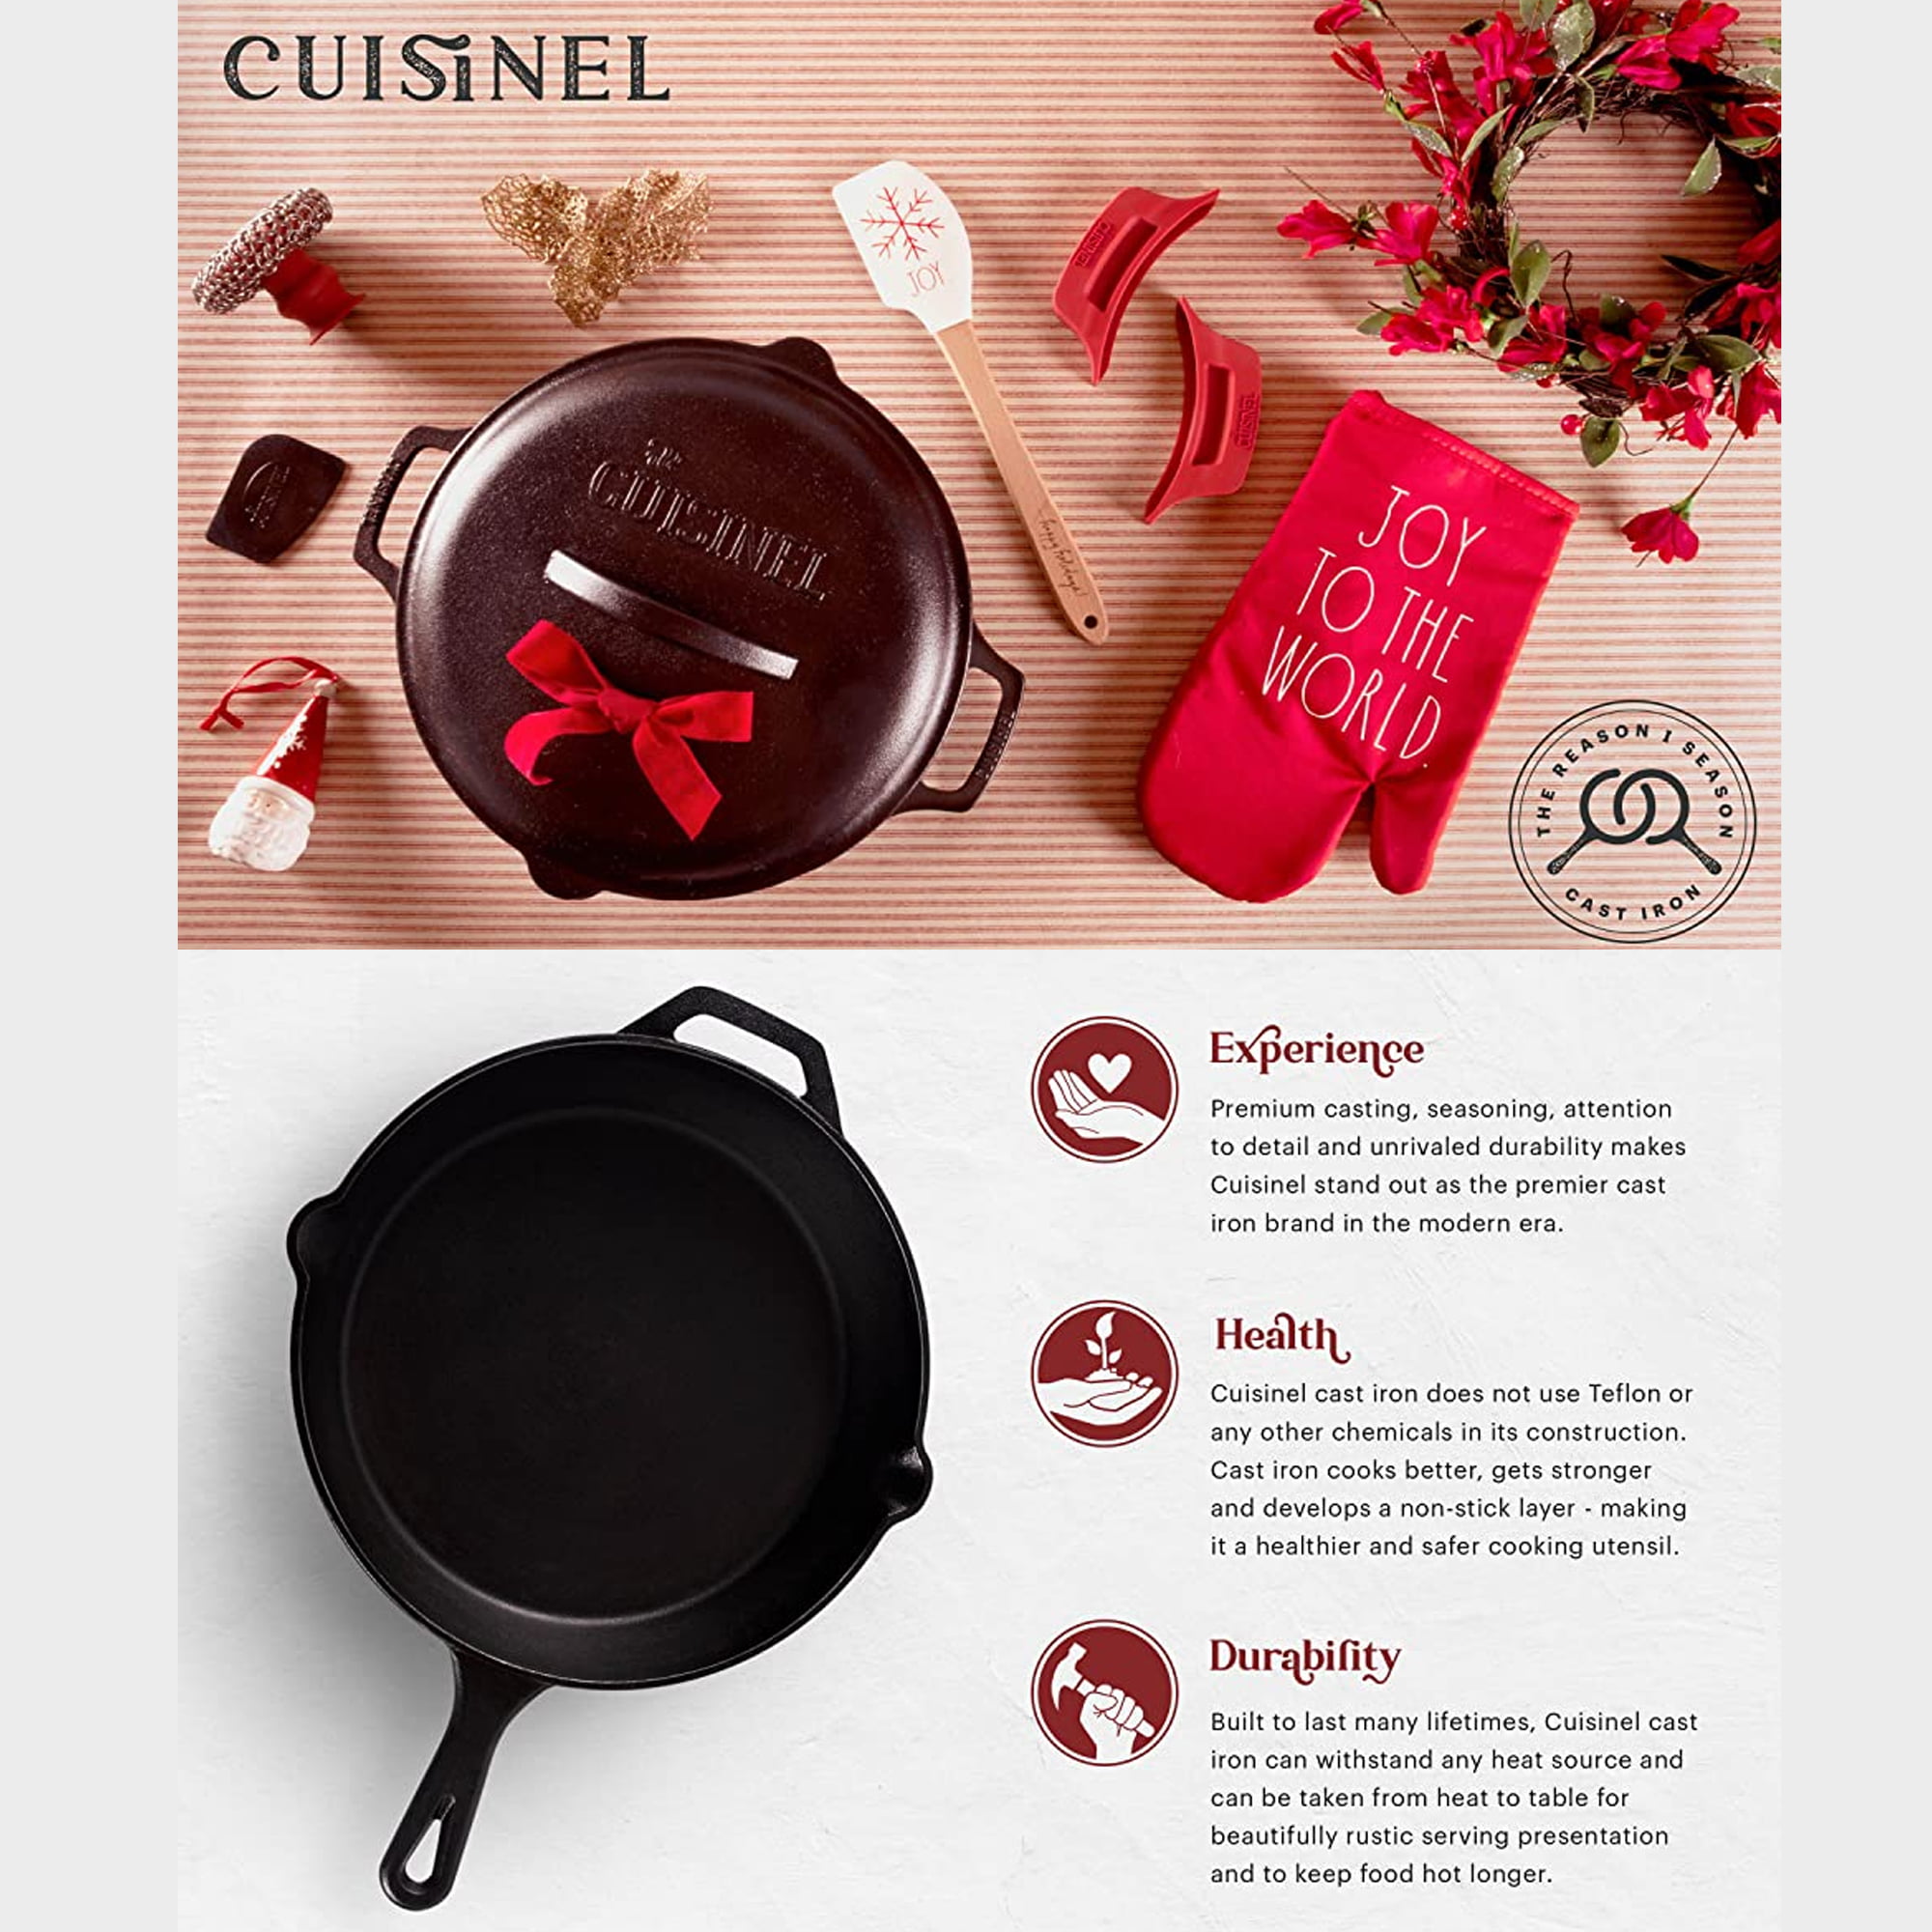 Uno Casa Cast Iron Skillet Set - 2-Piece Set 10 in and 12 in - Pre-Seasoned Cast Iron Frying Pan - Oven Safe